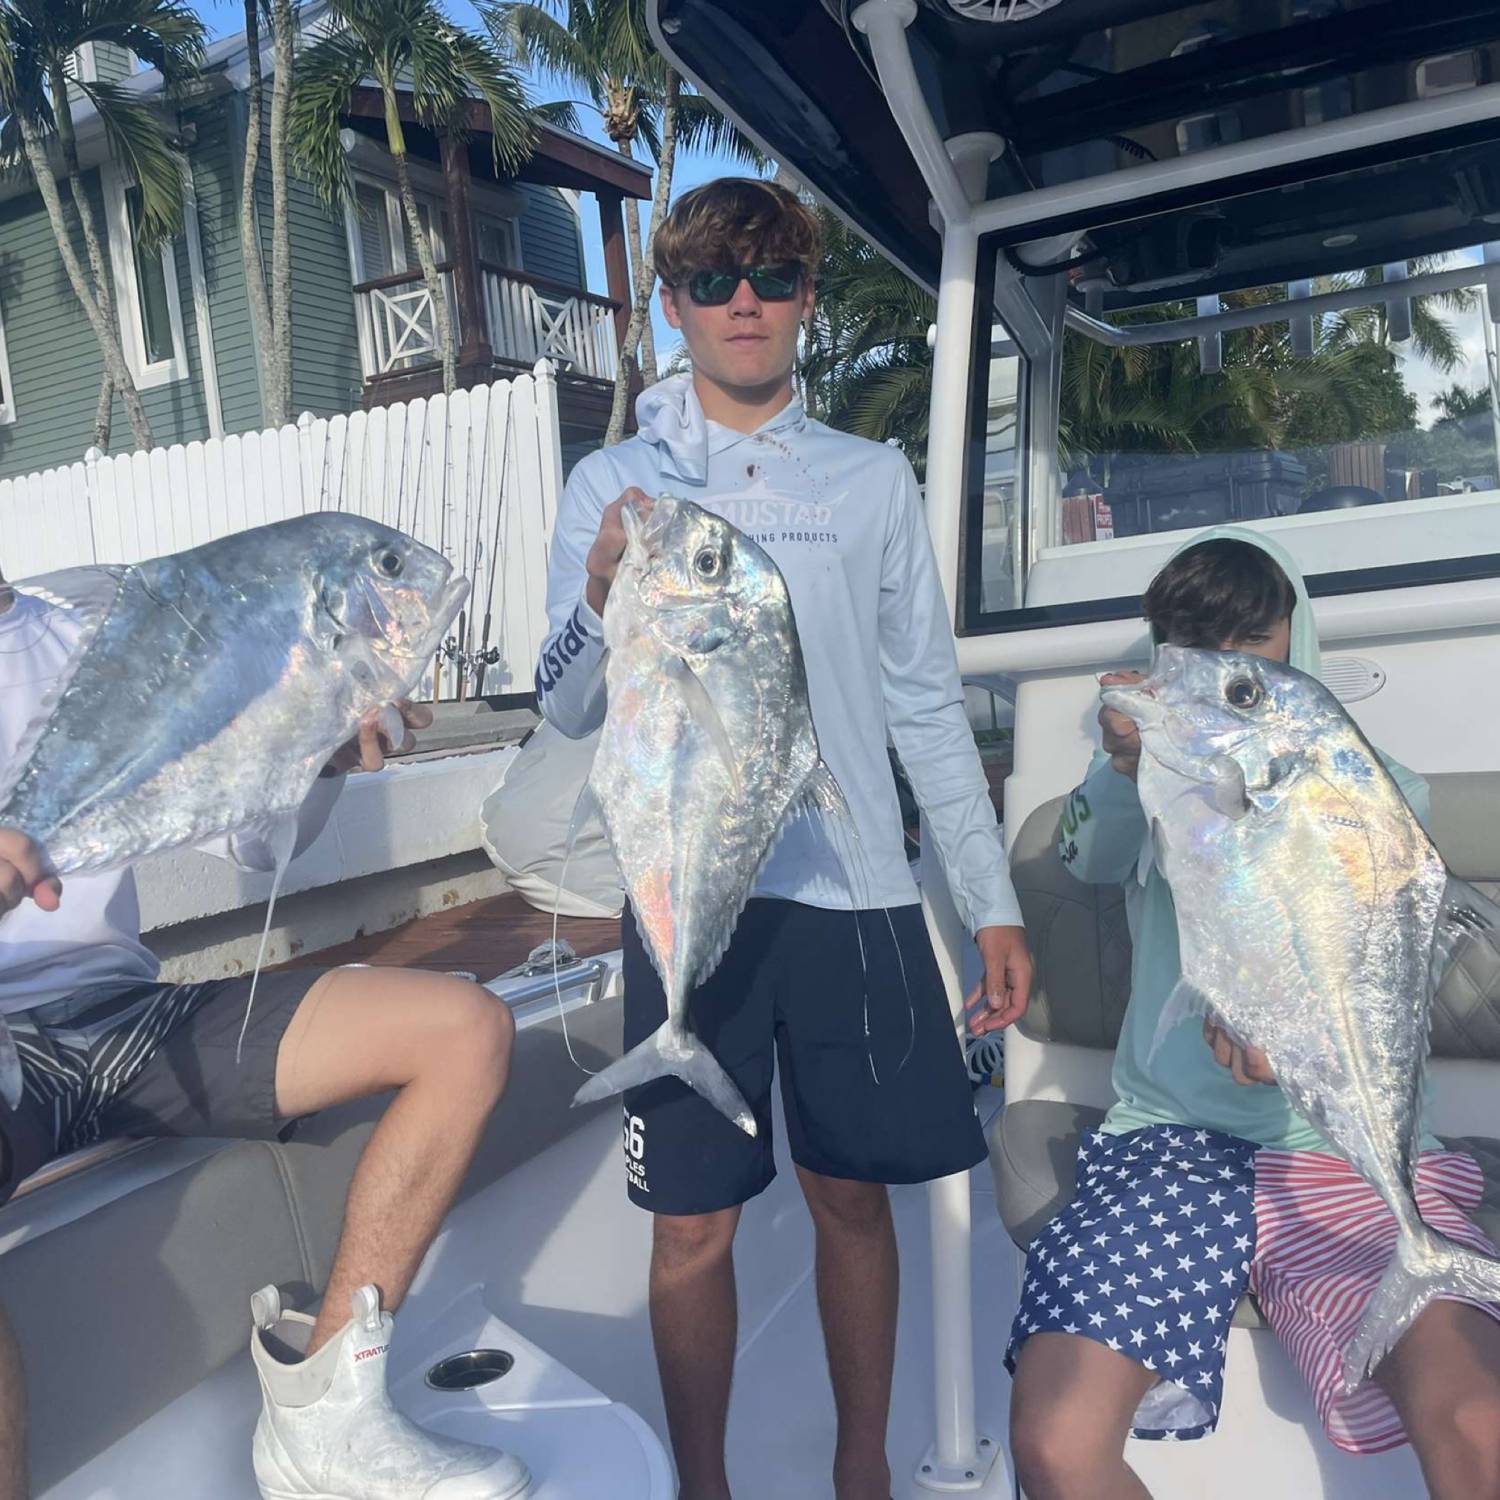 Title: African Pompos - On board their Sportsman Open 282 Center Console - Location: Downtown Naples Fl. Participating in the Photo Contest #SportsmanFebruary2022